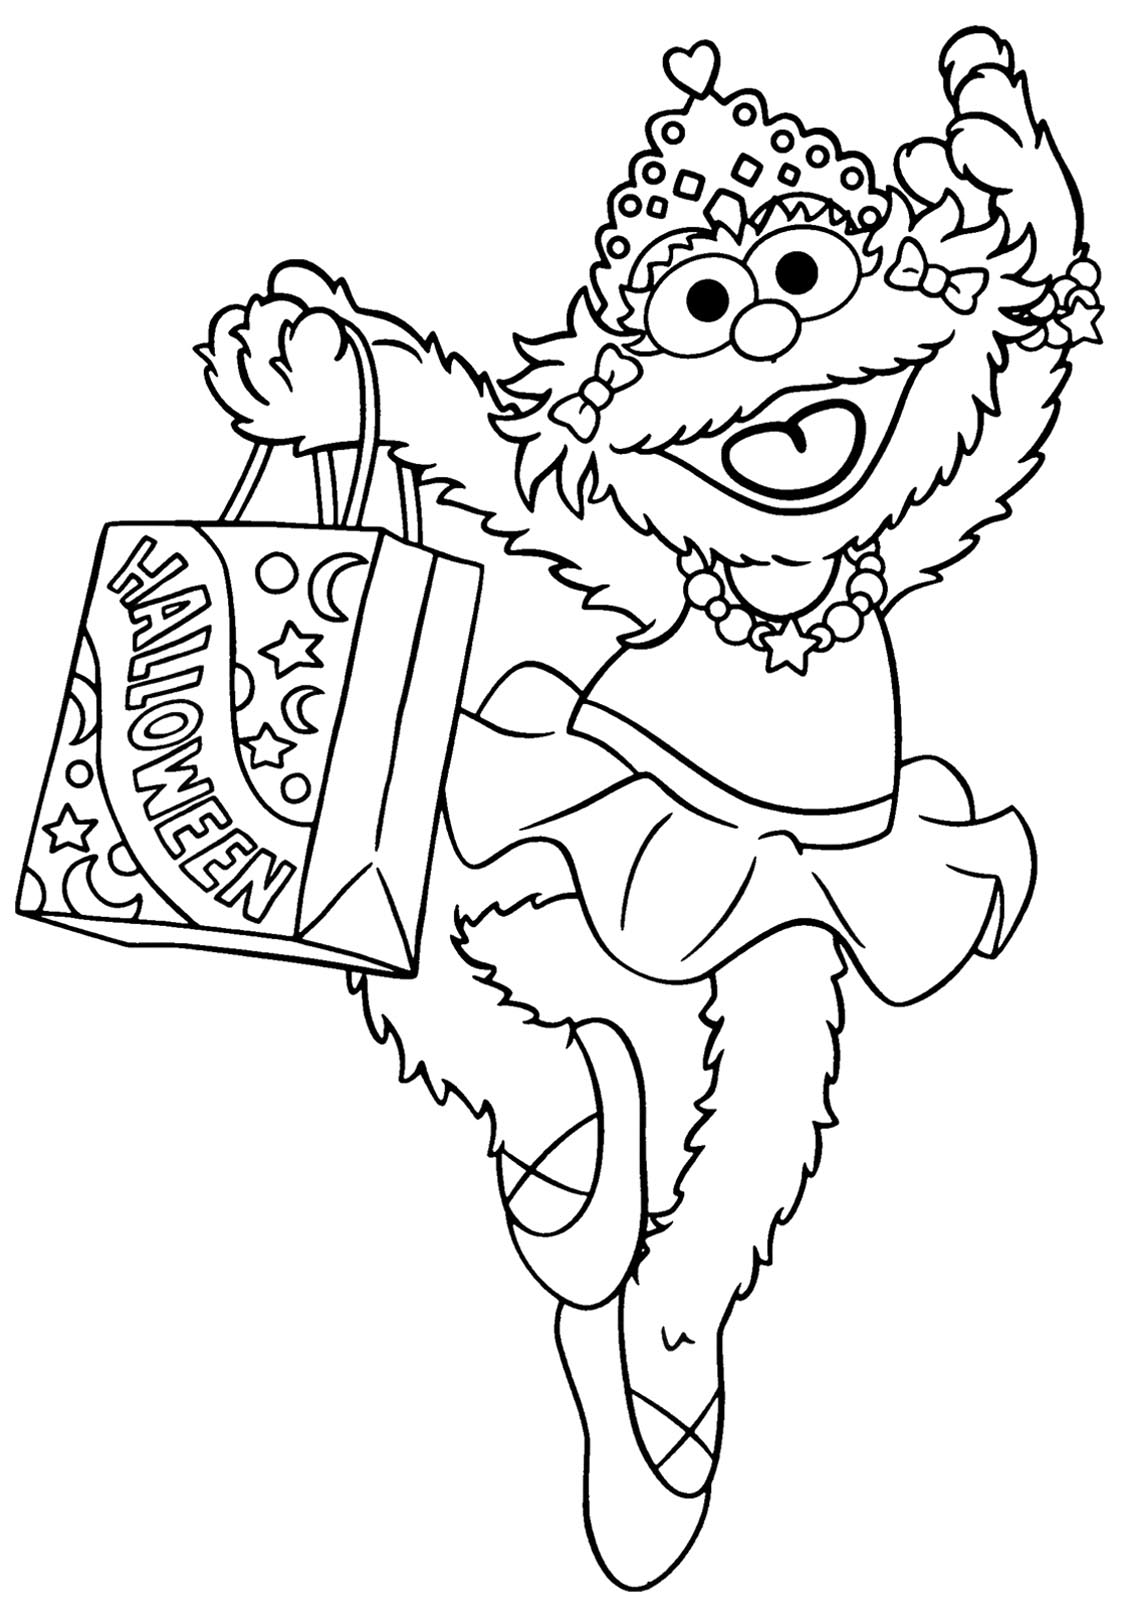 Sesame street coloring pages to print for kids